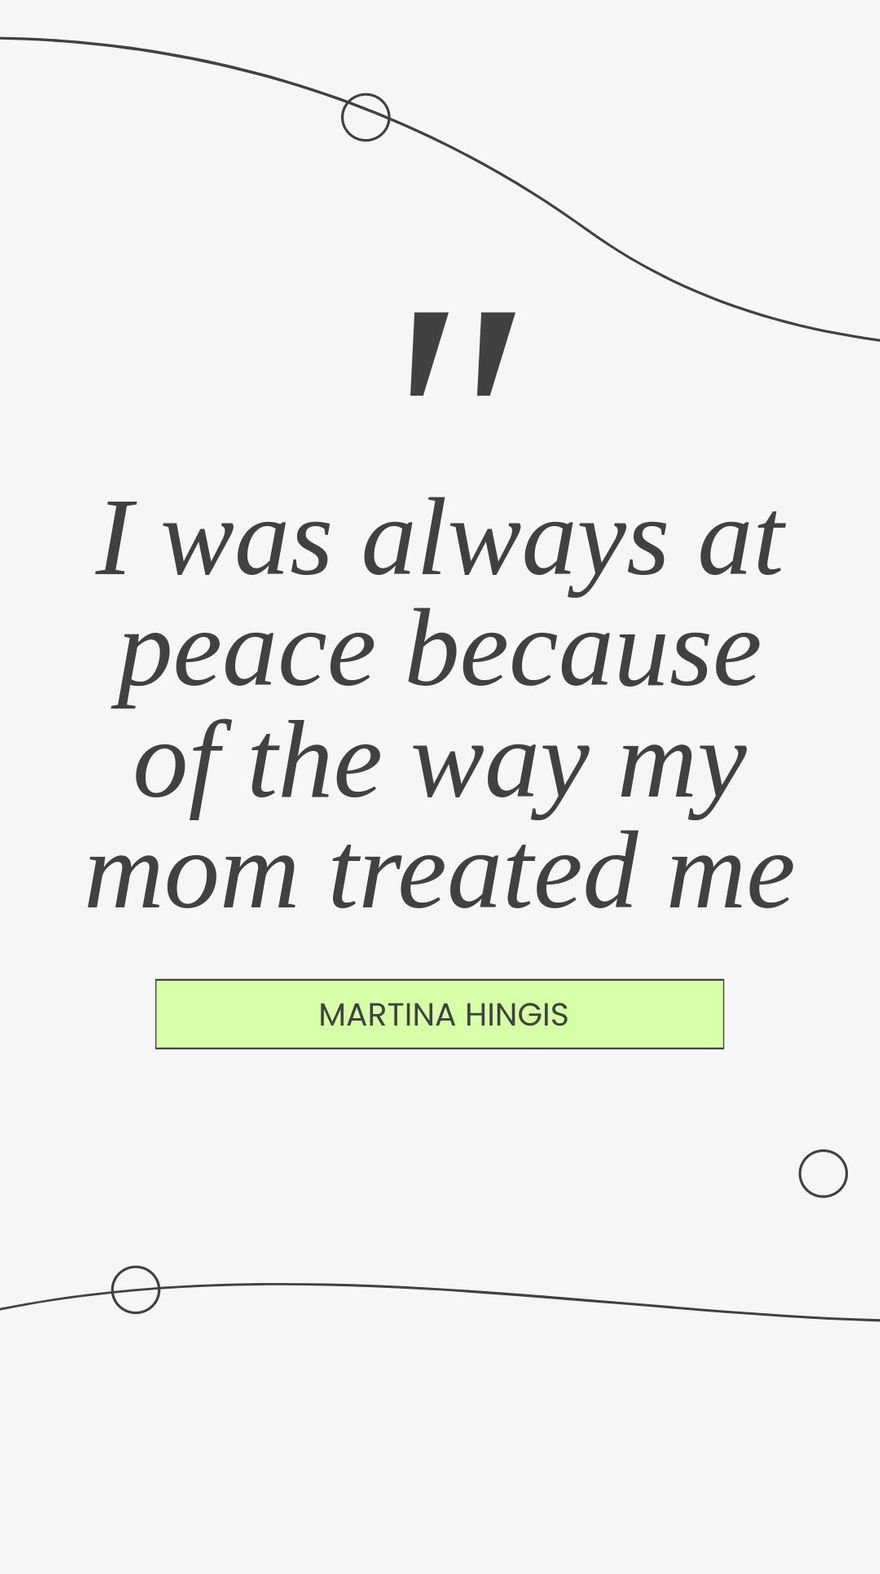 Free Martina Hingis - I was always at peace because of the way my mom treated me.  in JPG